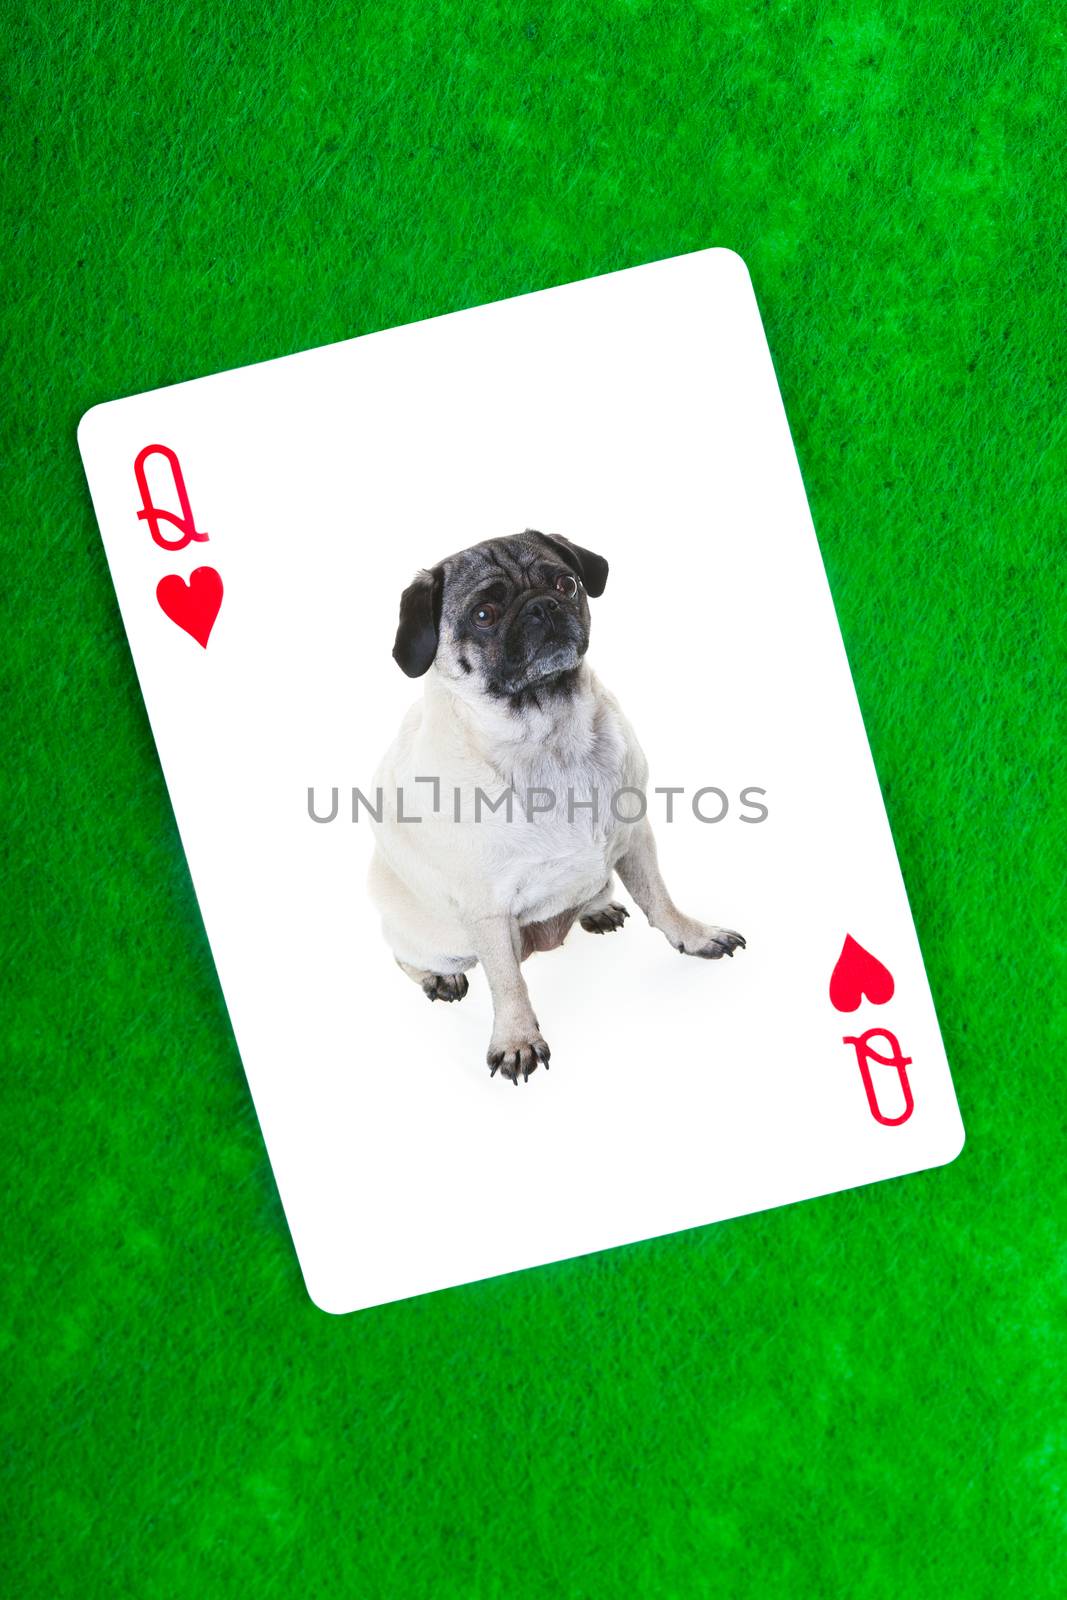 A purebred Pug on a playing card against green felt.  A fitting frame for a little dog who thinks she is queen!